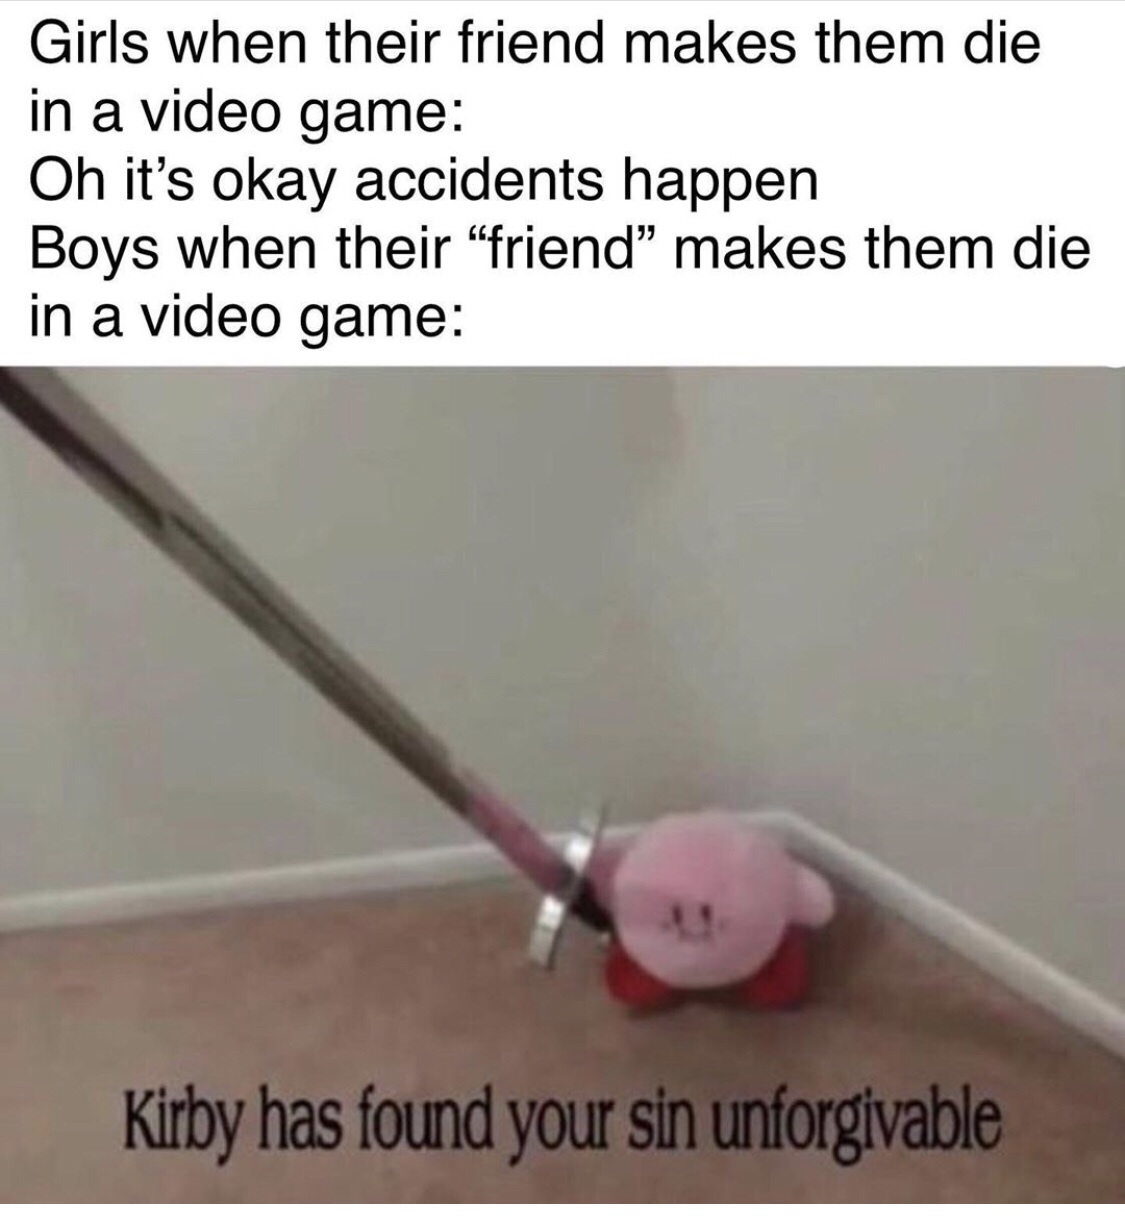 kirby has found your sin unforgivable - Girls when their friend makes them die in a video game Oh it's okay accidents happen Boys when their friend makes them die in a video game Kirby has found your sin unforgivable